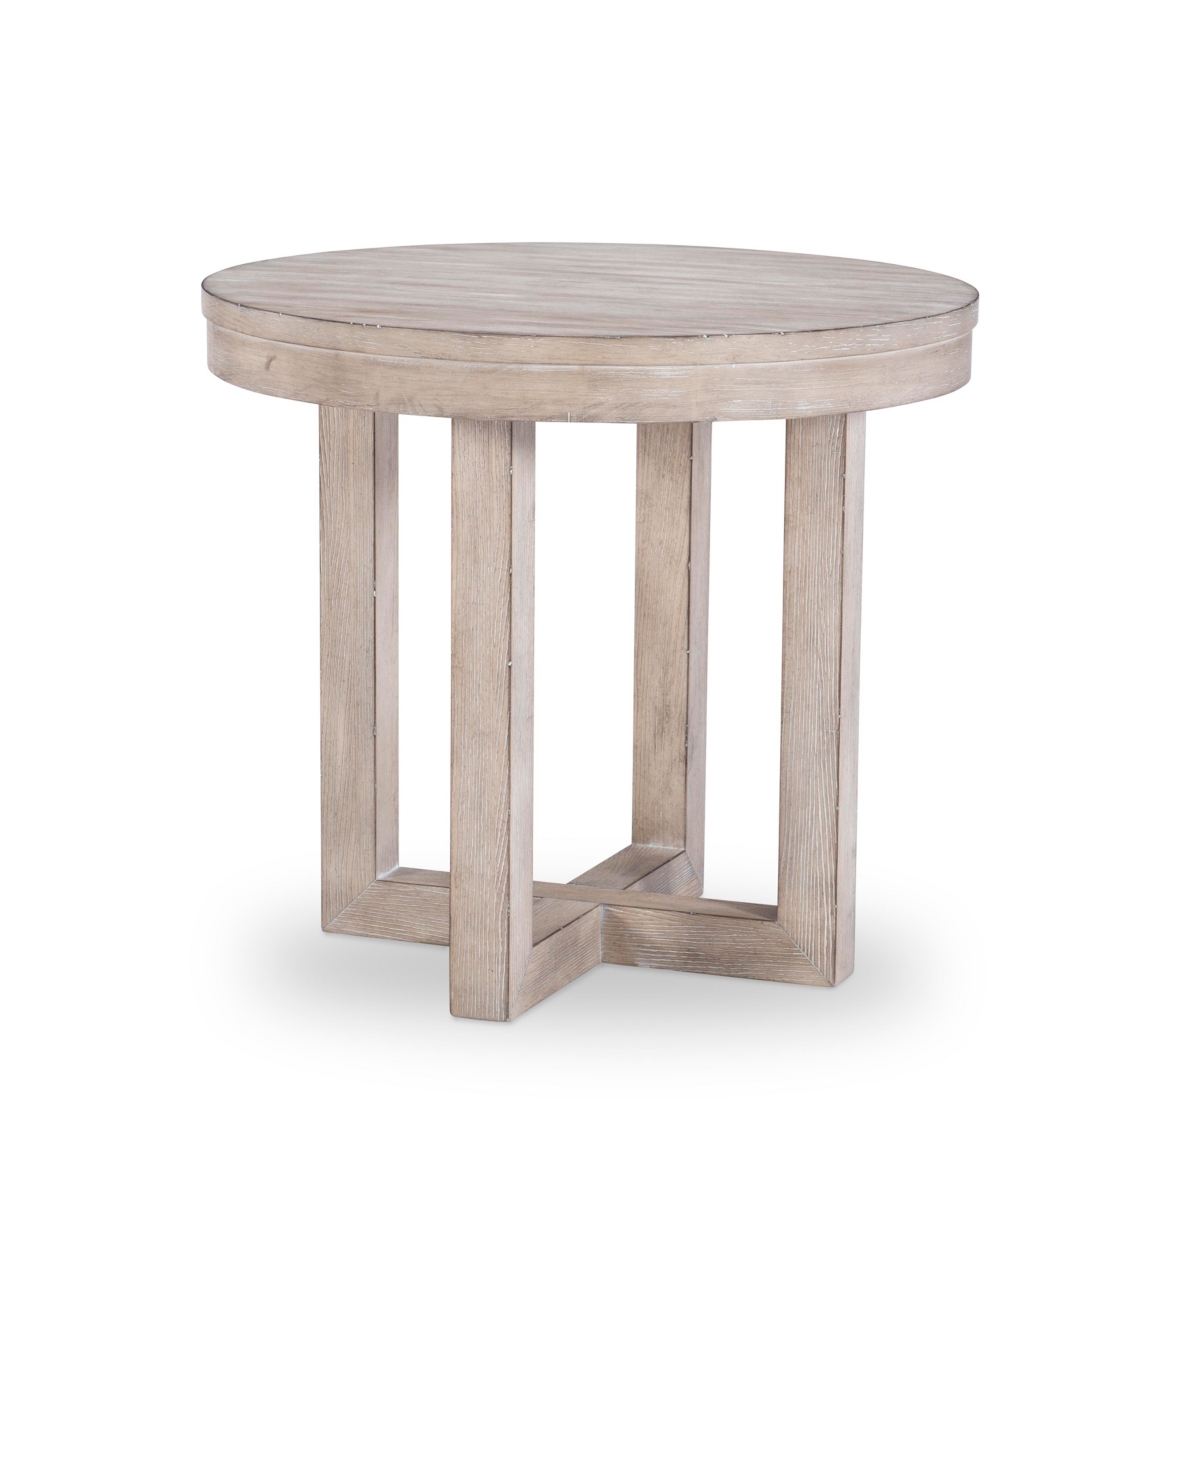 Furniture Westwood Round Lamp Table In Weathered Oak